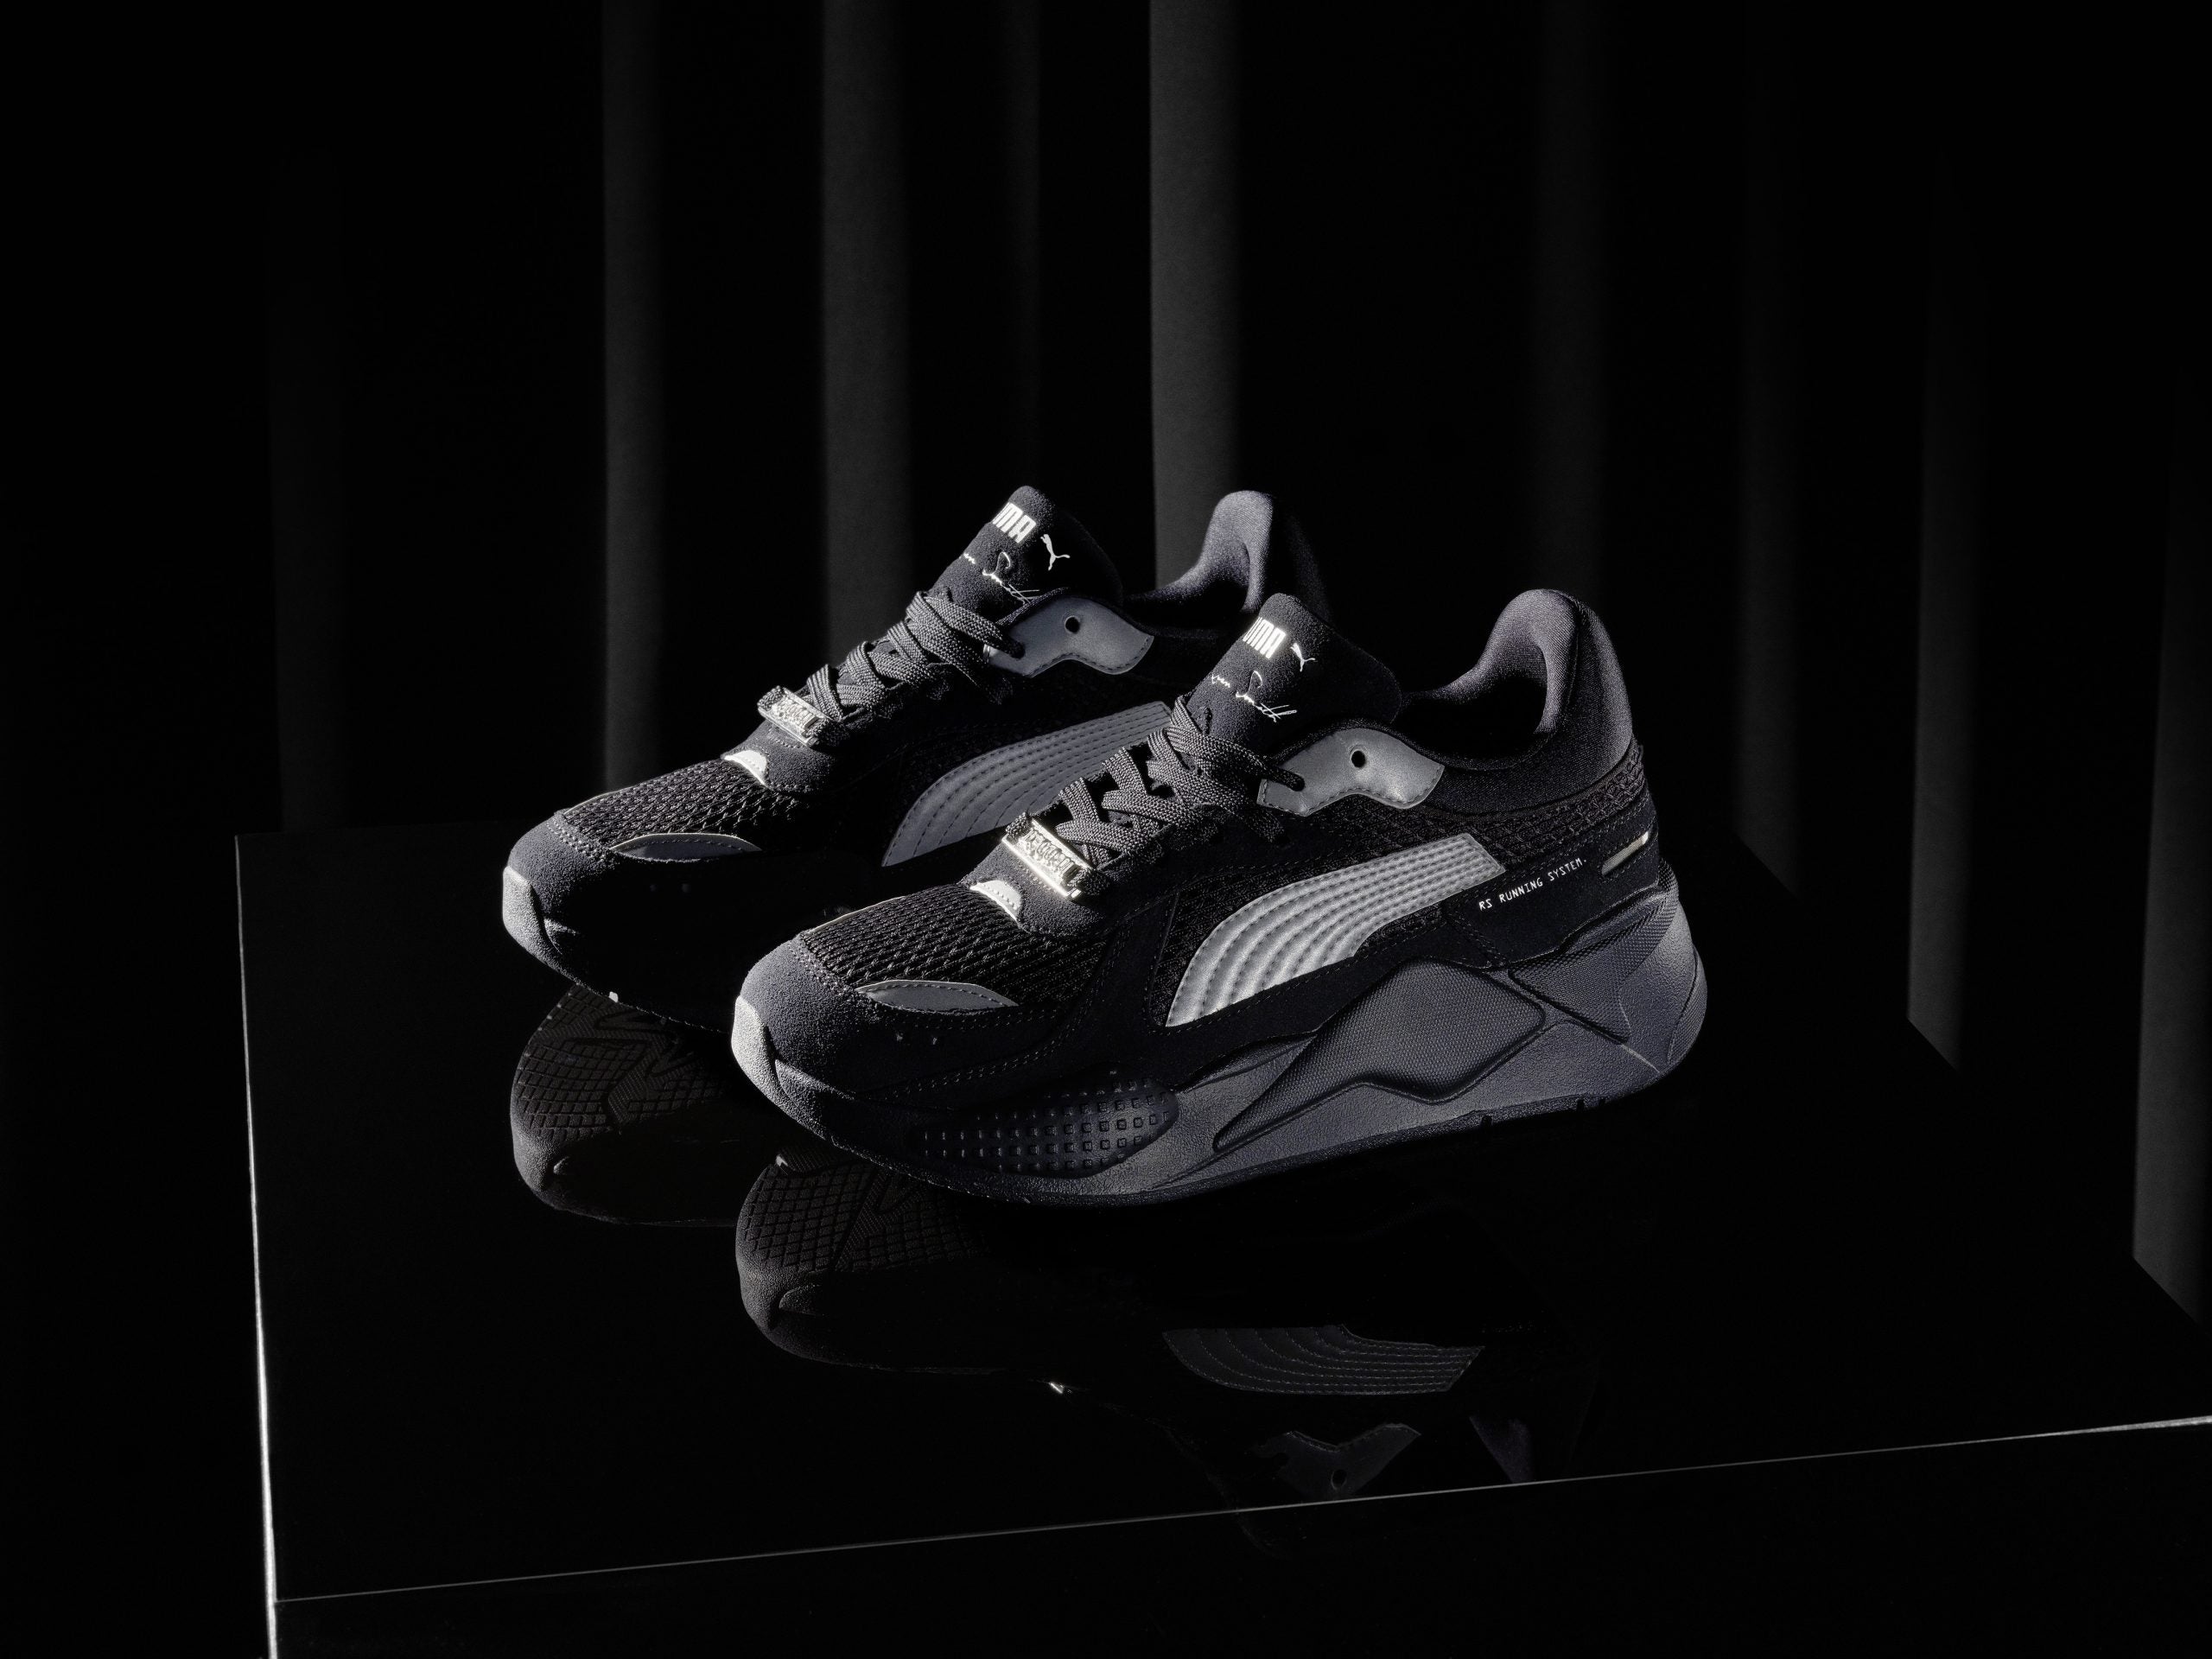 LaQuan Smith X Puma Debut First Capsule Collection